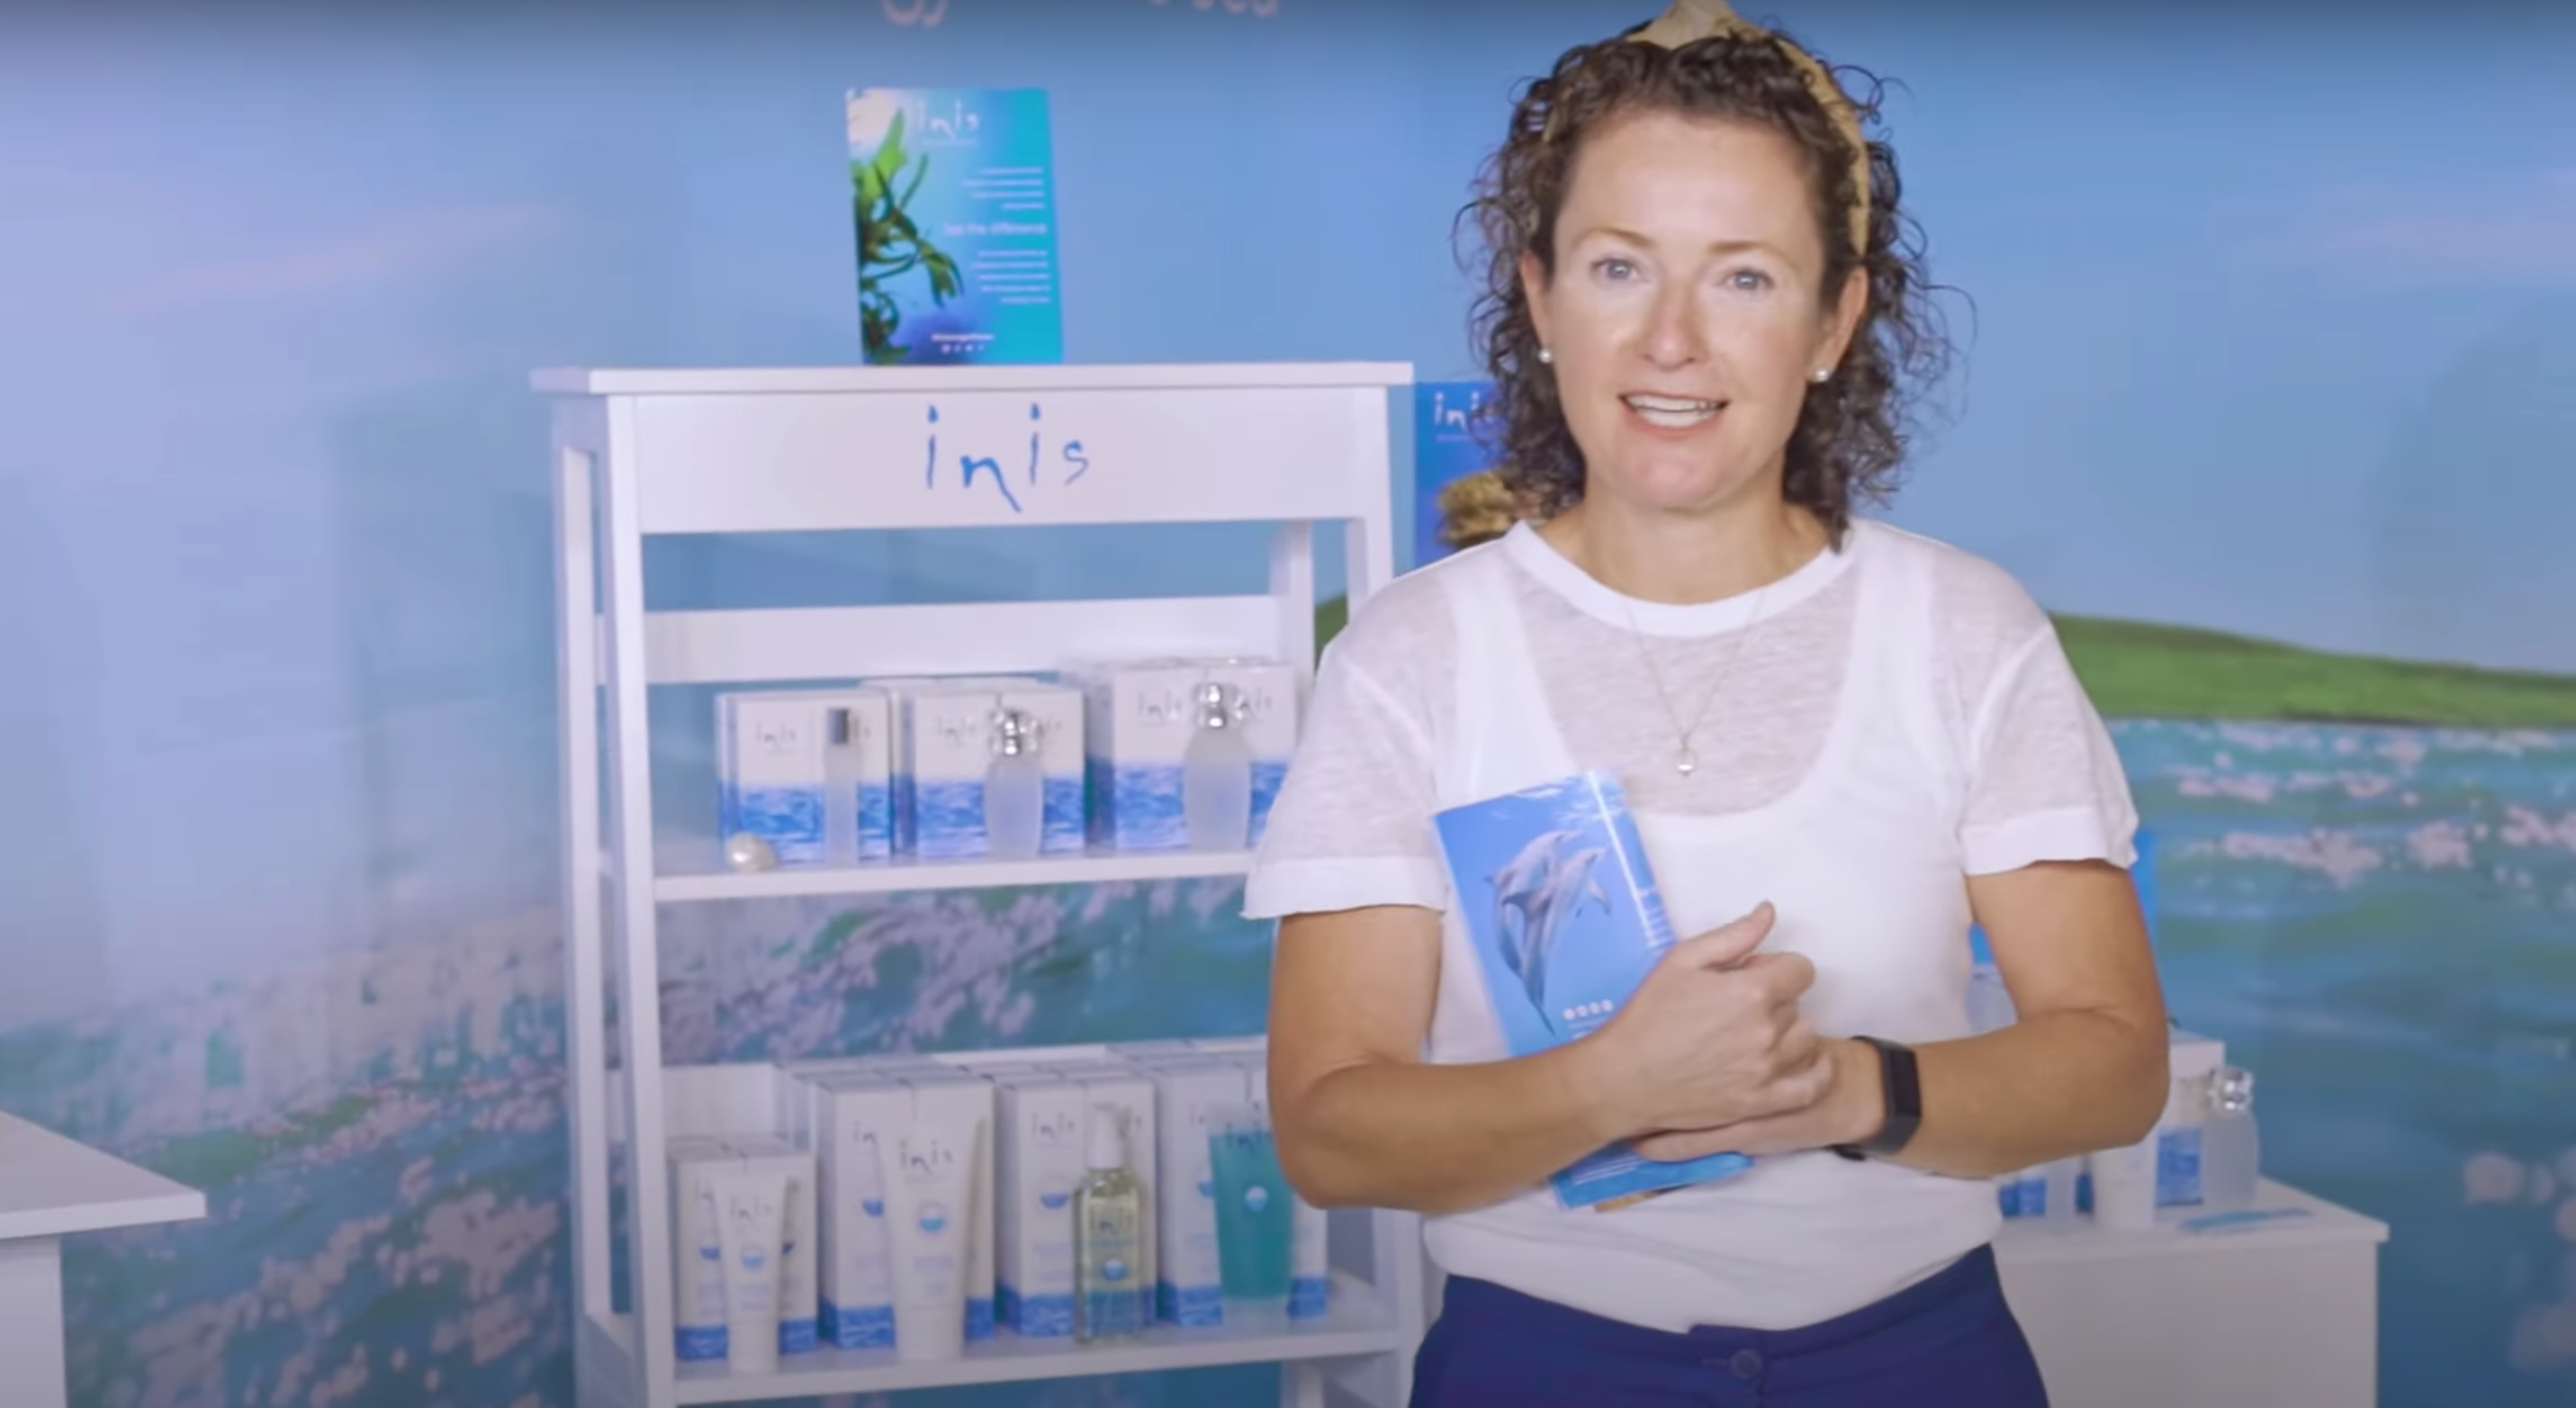 Inis Energy of the Sea Virtual Trade Show